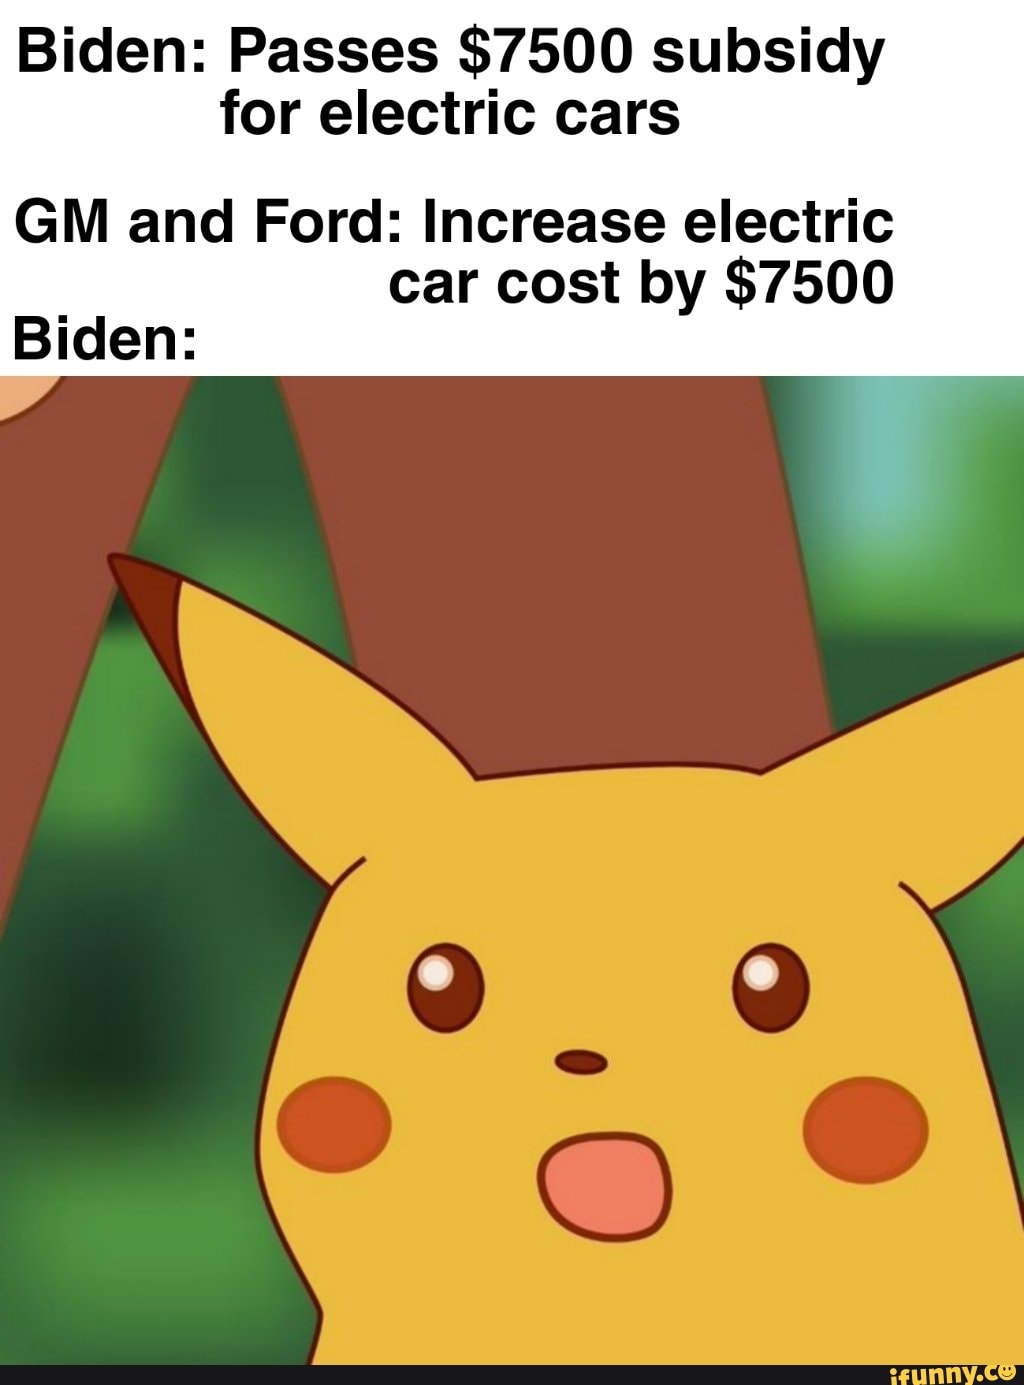 Biden Passes 7500 subsidy for electric cars GM and Ford Increase